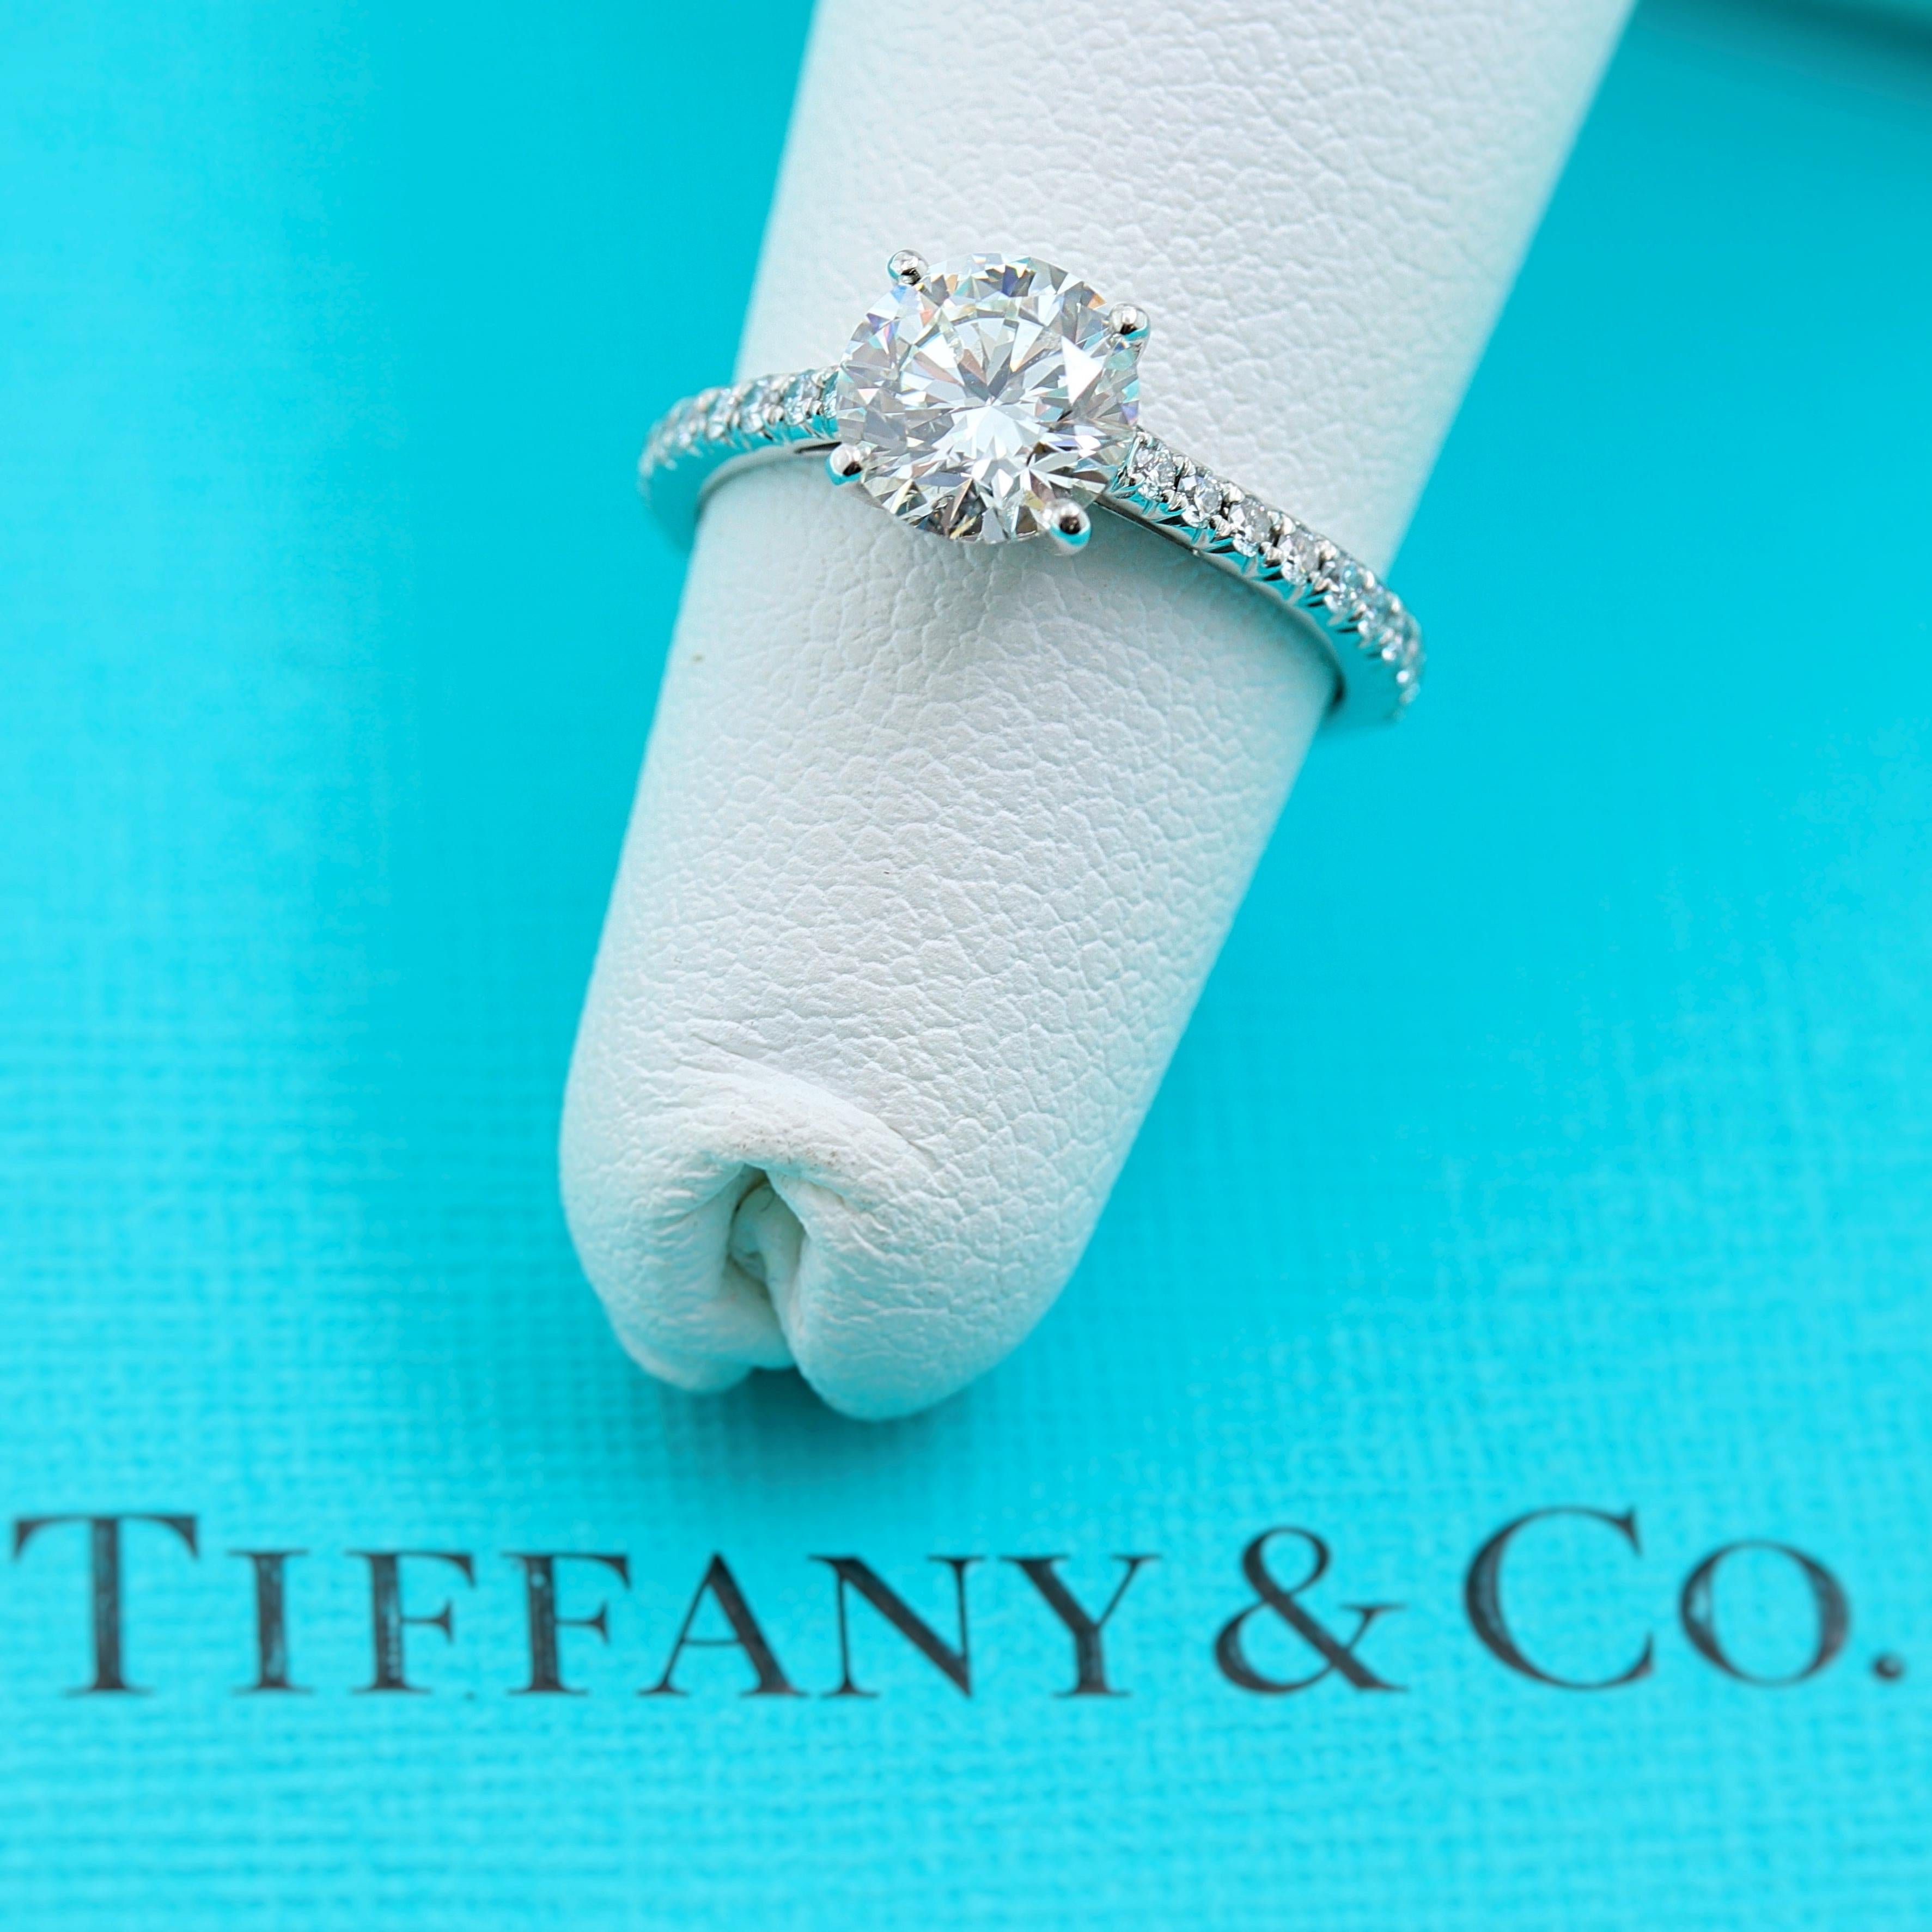 Tiffany & Co. Novo Diamond Engagement Ring 

Style:  Novo Solitaire with Micro - Pave Diamonds on the Band
Metal:  Platinum
Size:  5 - sizable
Total Carat Weight:  1.21 tcw
Diamond Shape:  Round Brilliant 1.05 cts
Diamond Color & Clarity:  I -